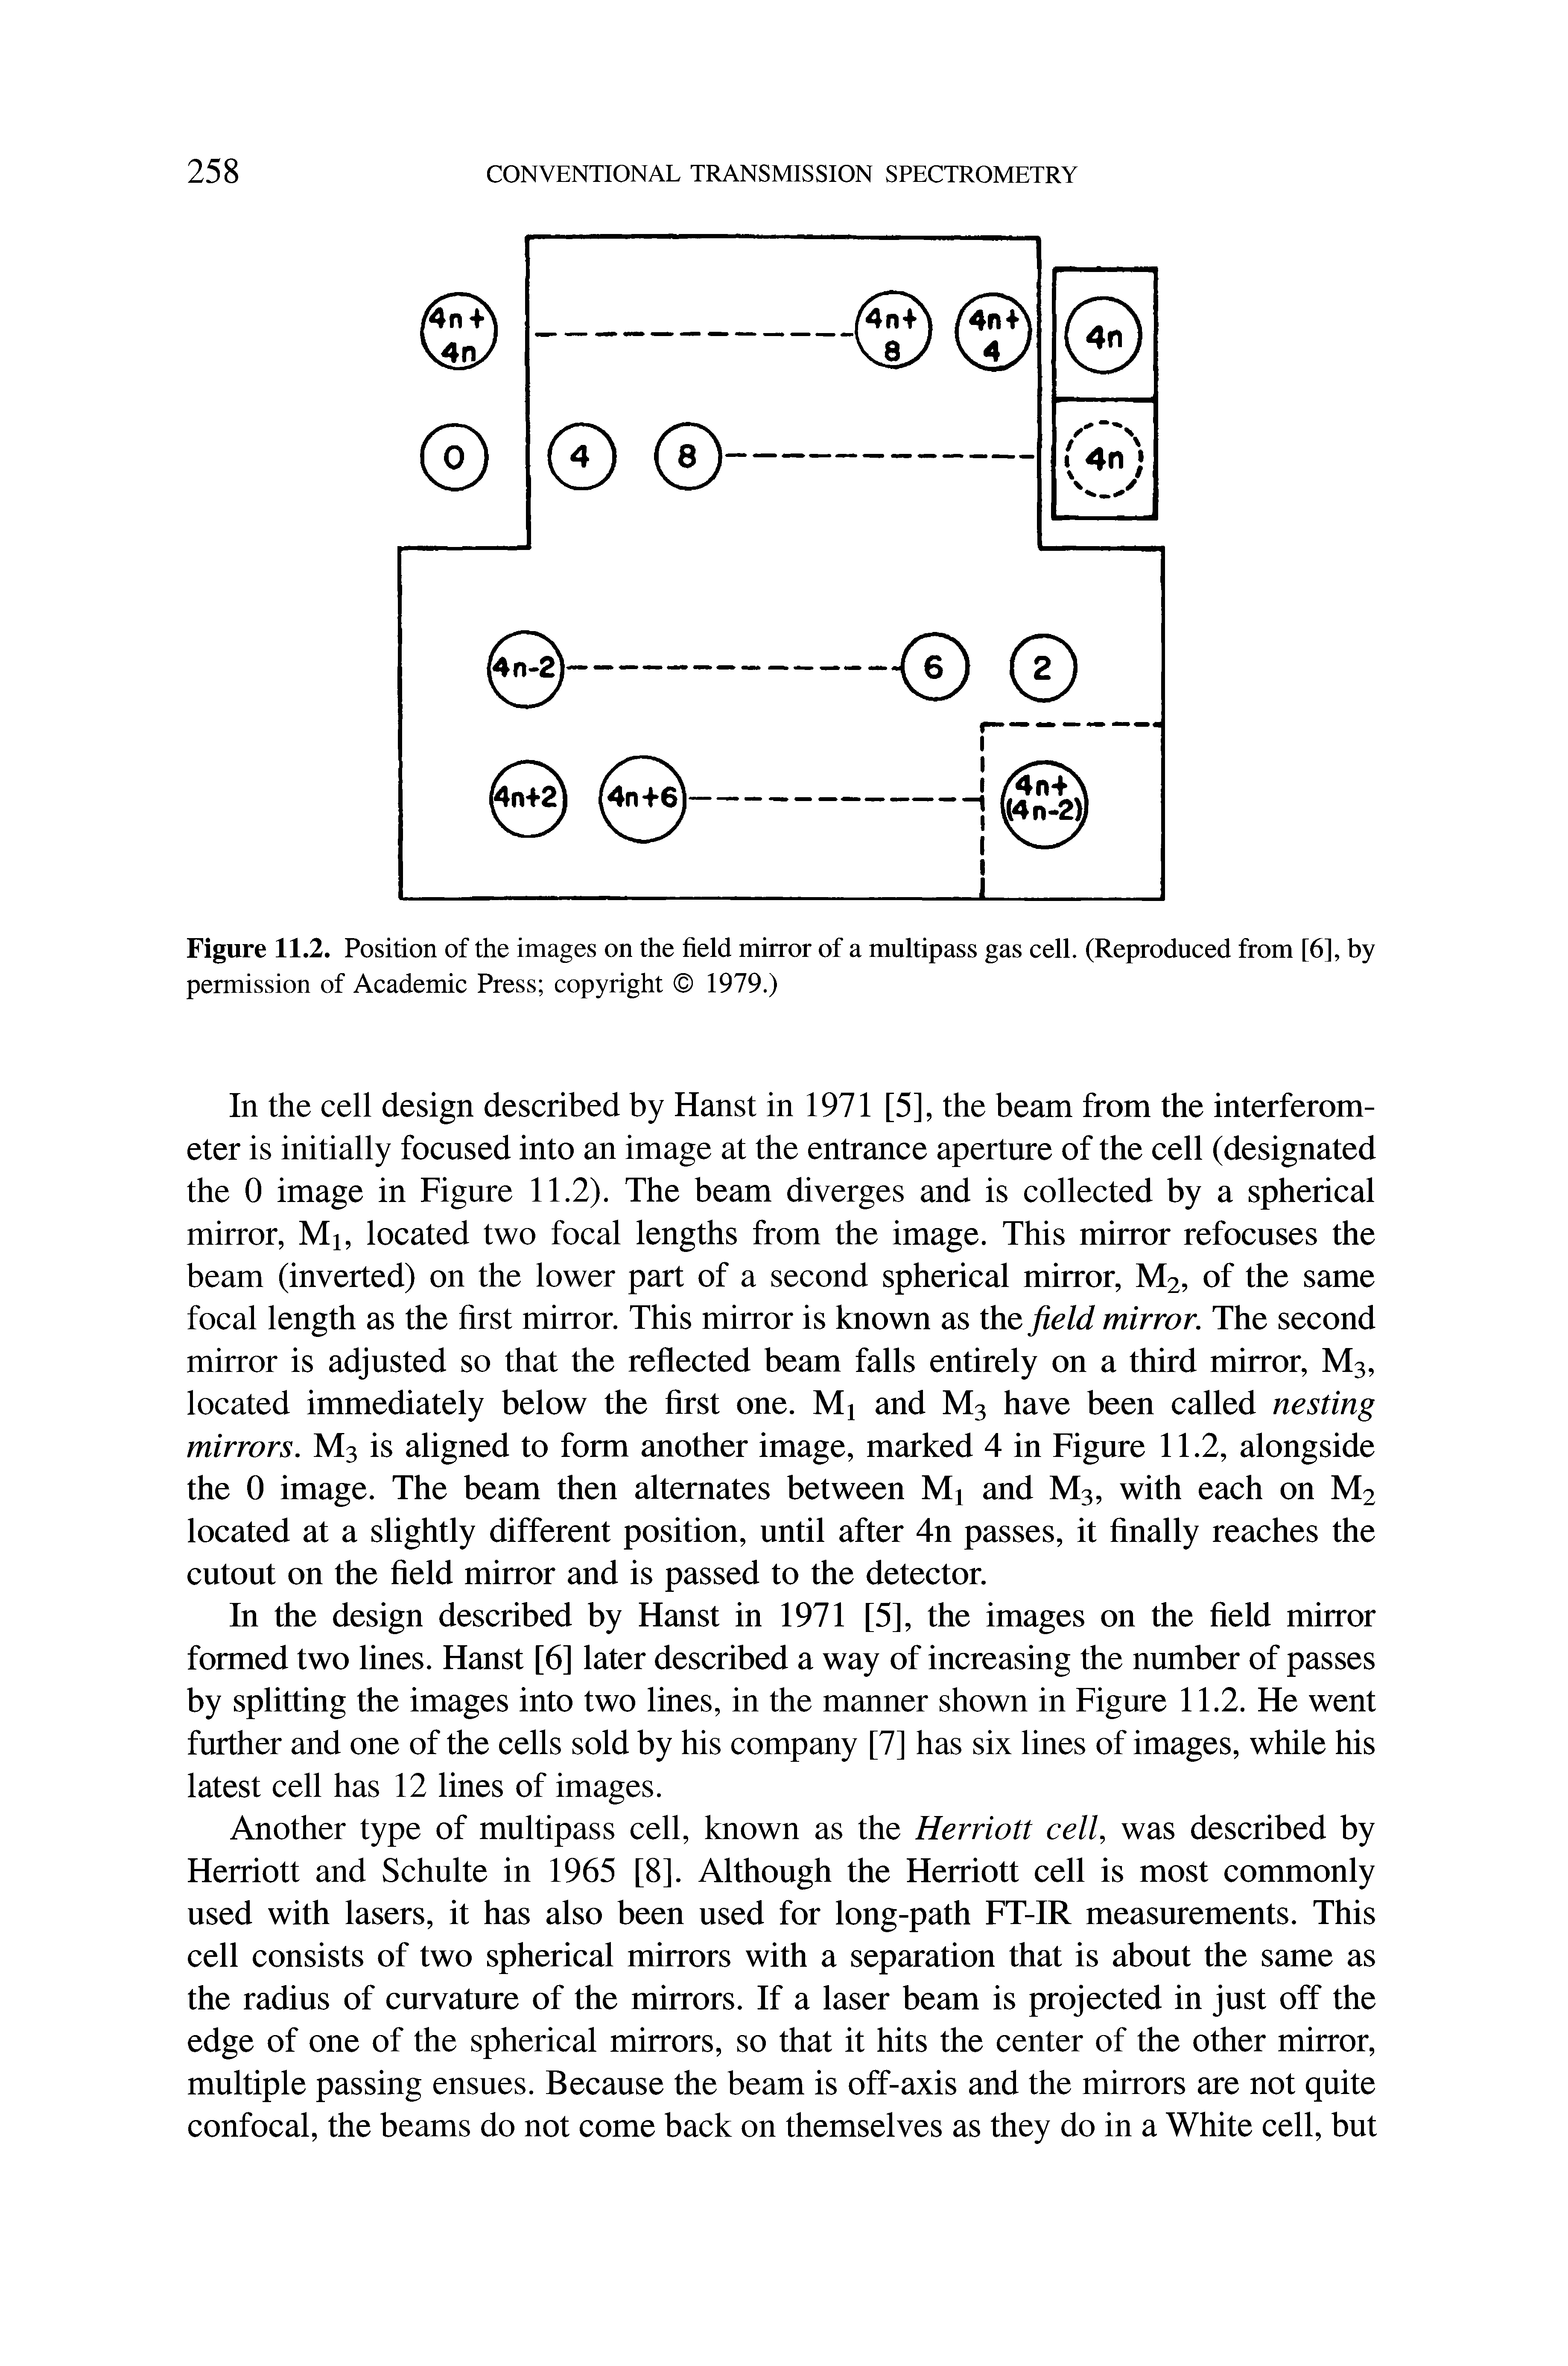 Figure 11.2. Position of the images on the field mirror of a multipass gas cell. (Reproduced from [6], by permission of Academic Press copyright 1979.)...